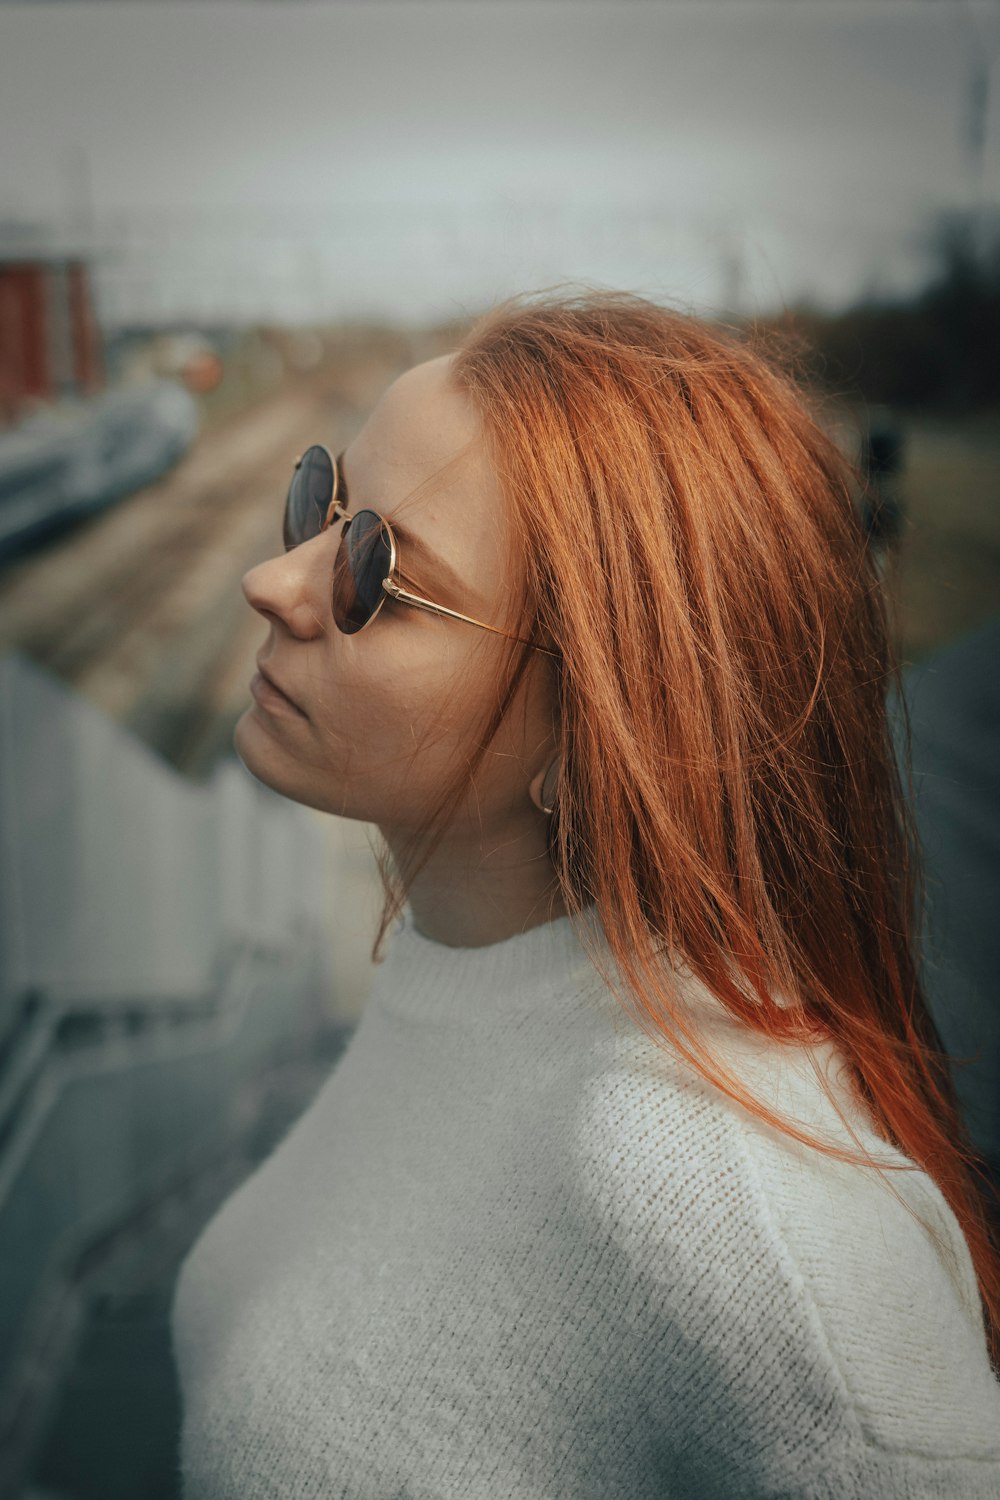 a woman with long red hair wearing sunglasses